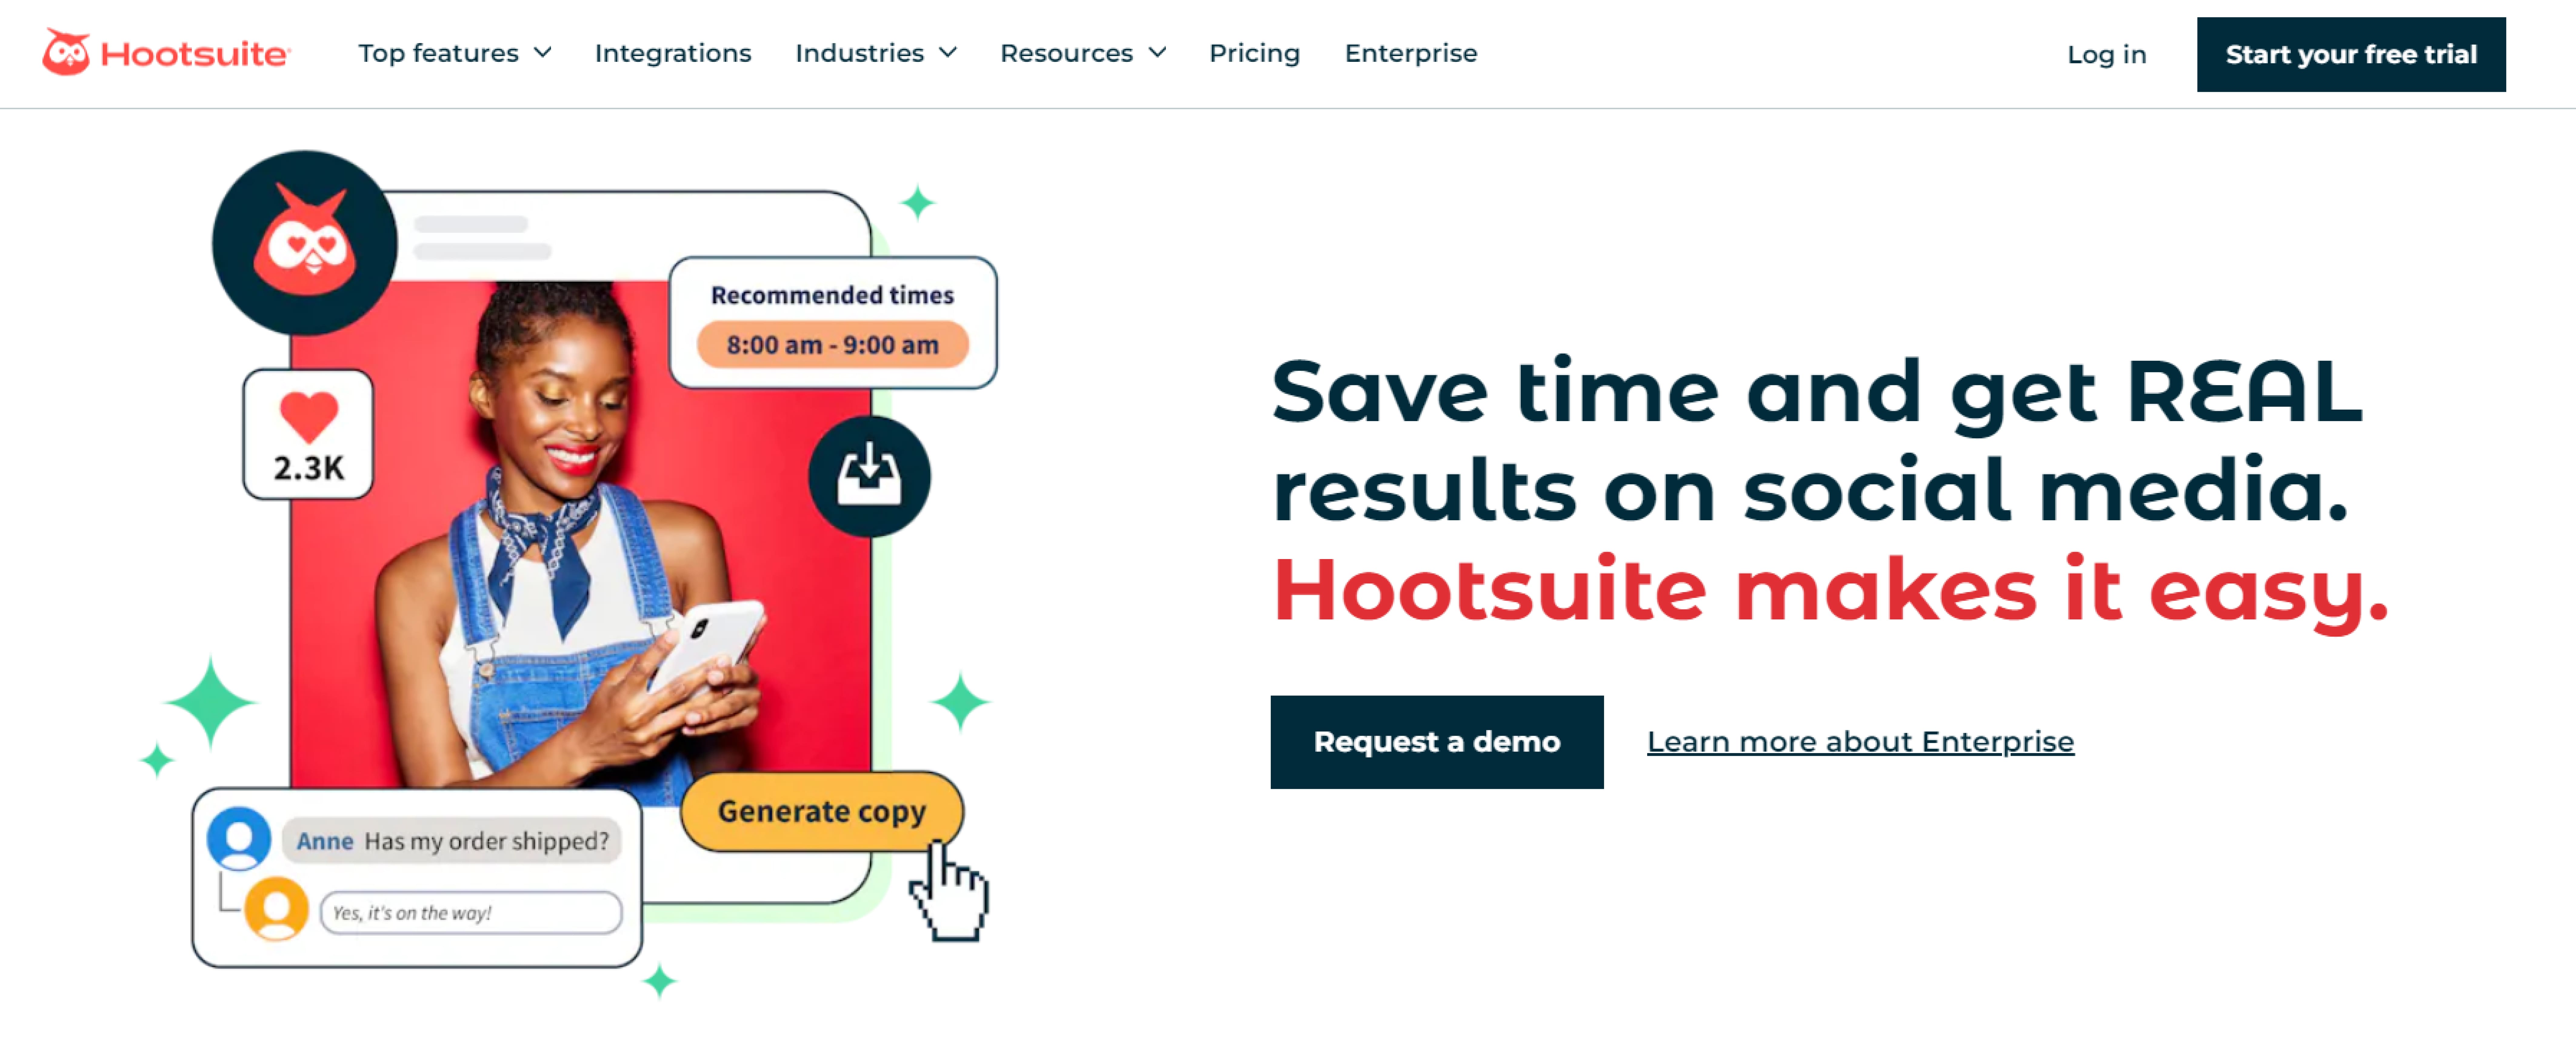 Hootsuite is a great tool for a real estate social media manager